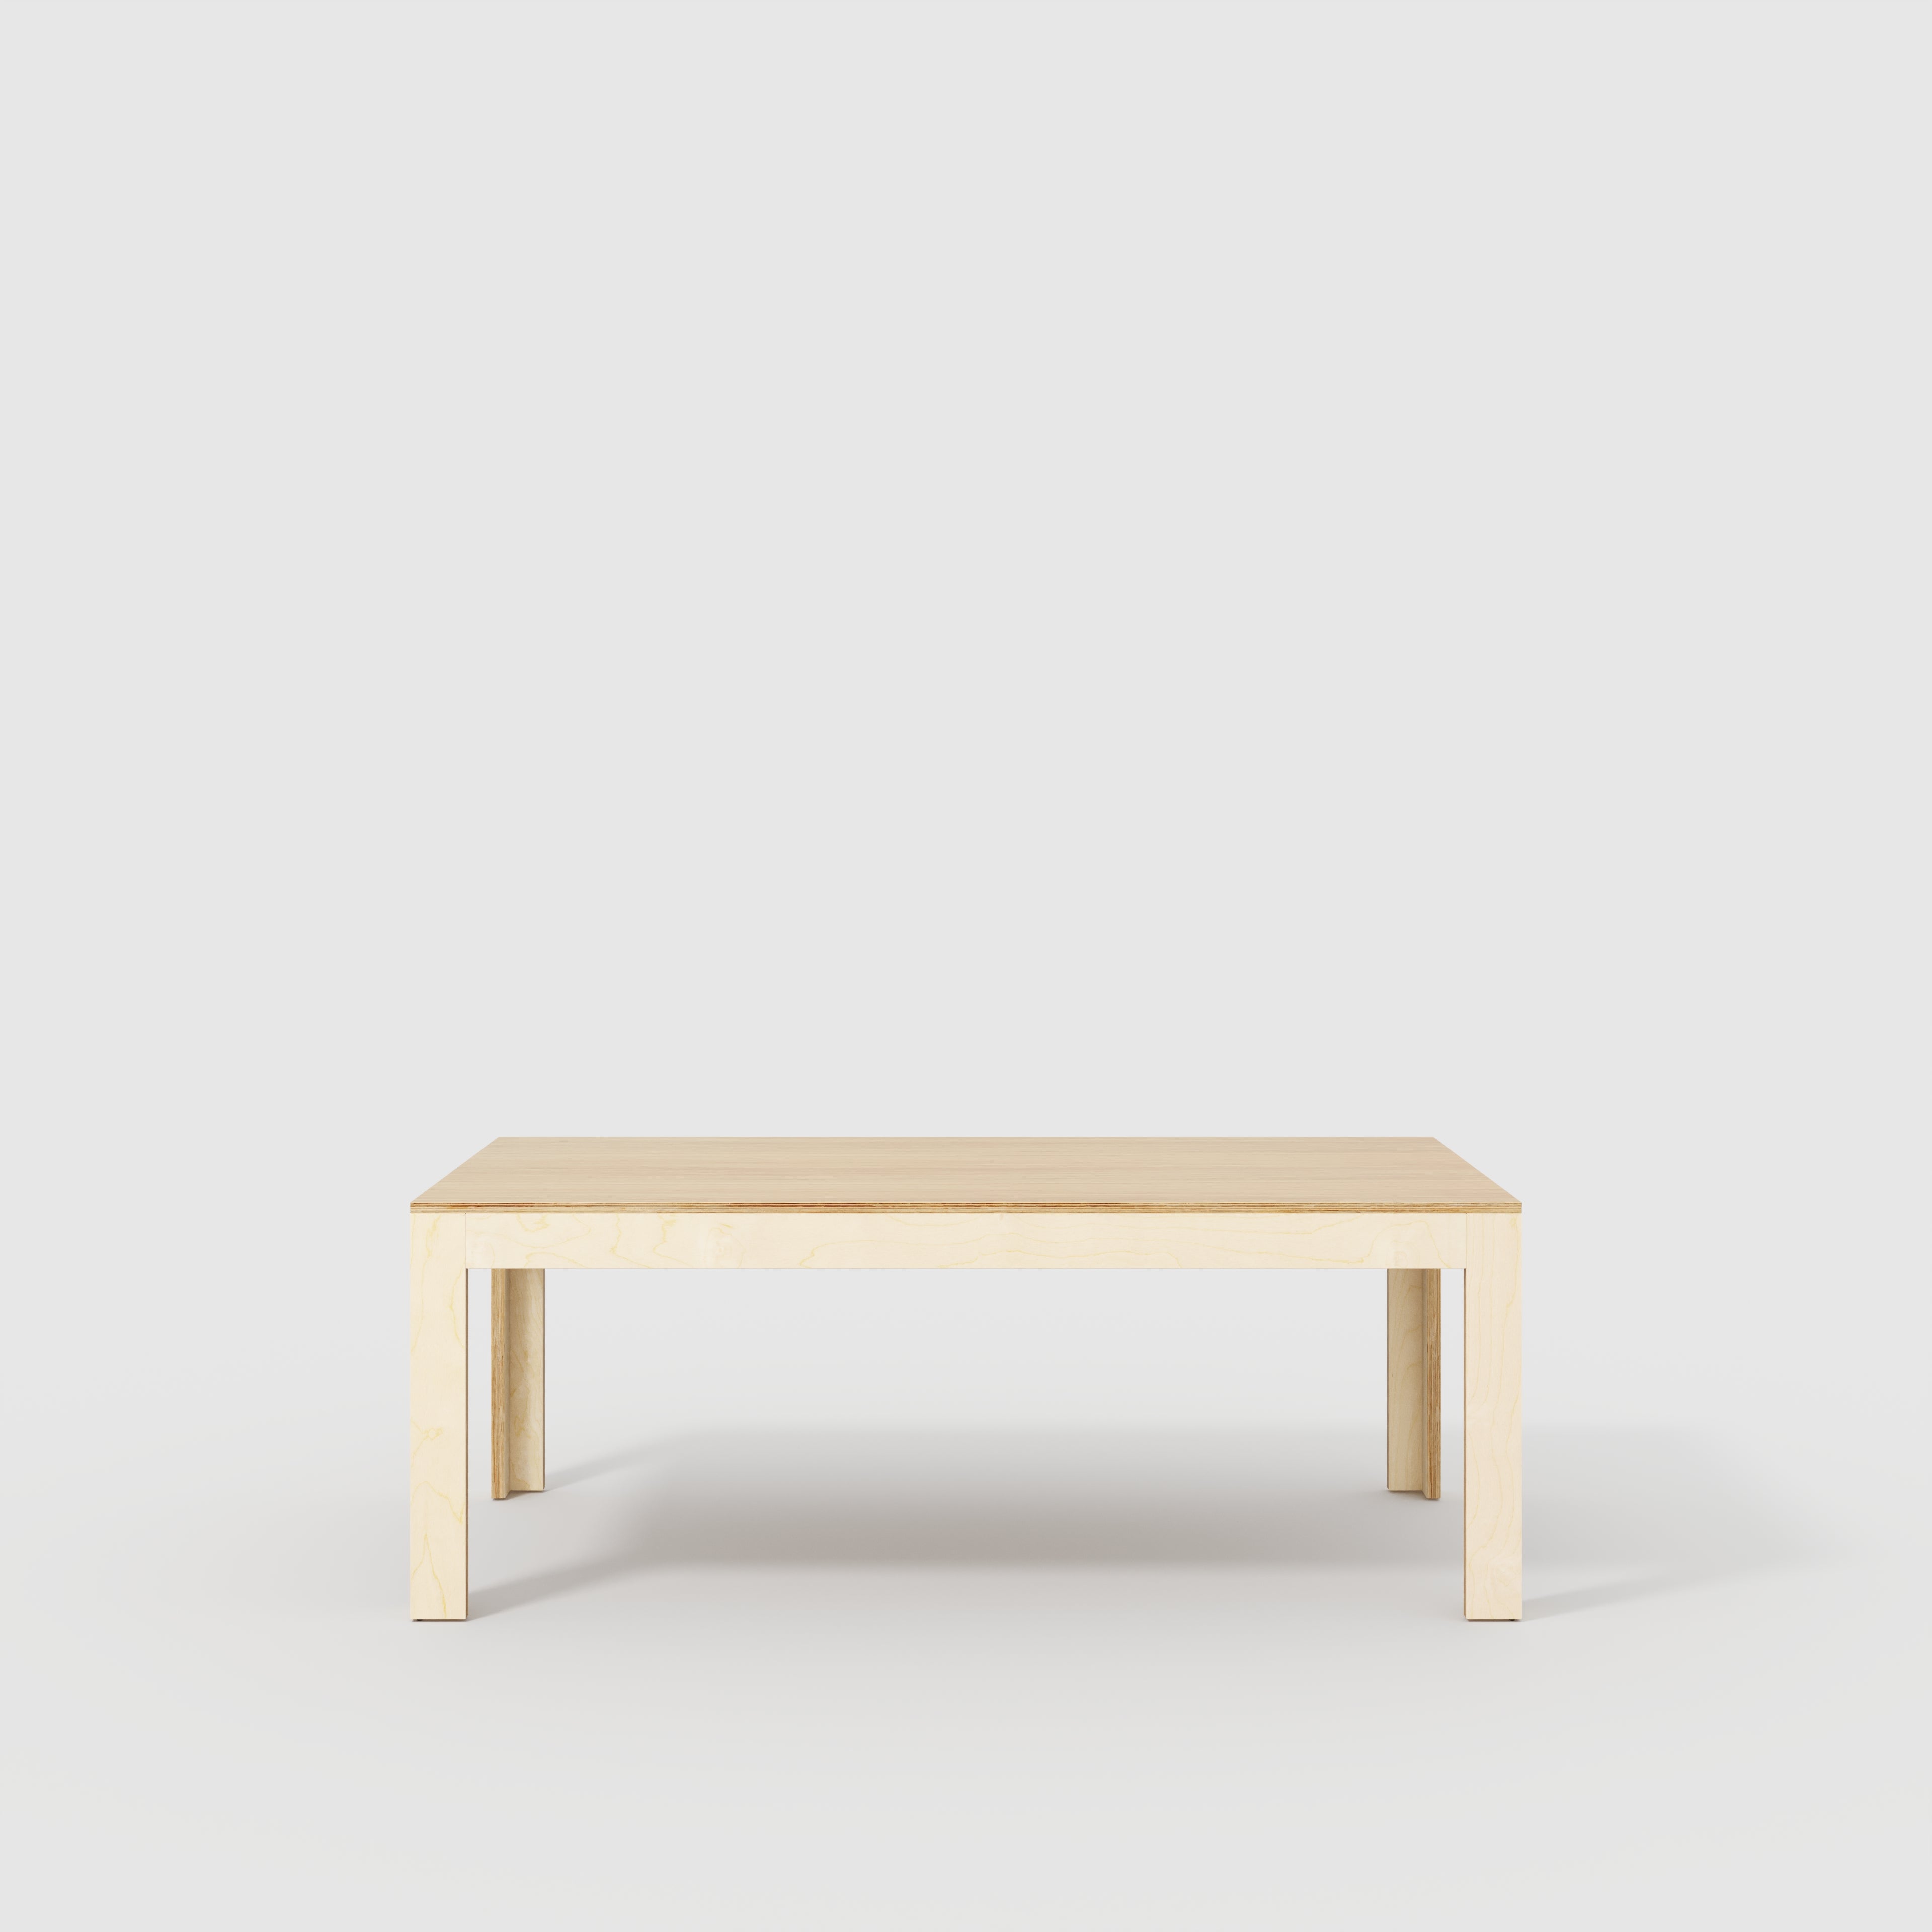 Table with Solid Frame - Plywood Oak - 2000(w) x 1000(d) x 750(h) x 750(h)